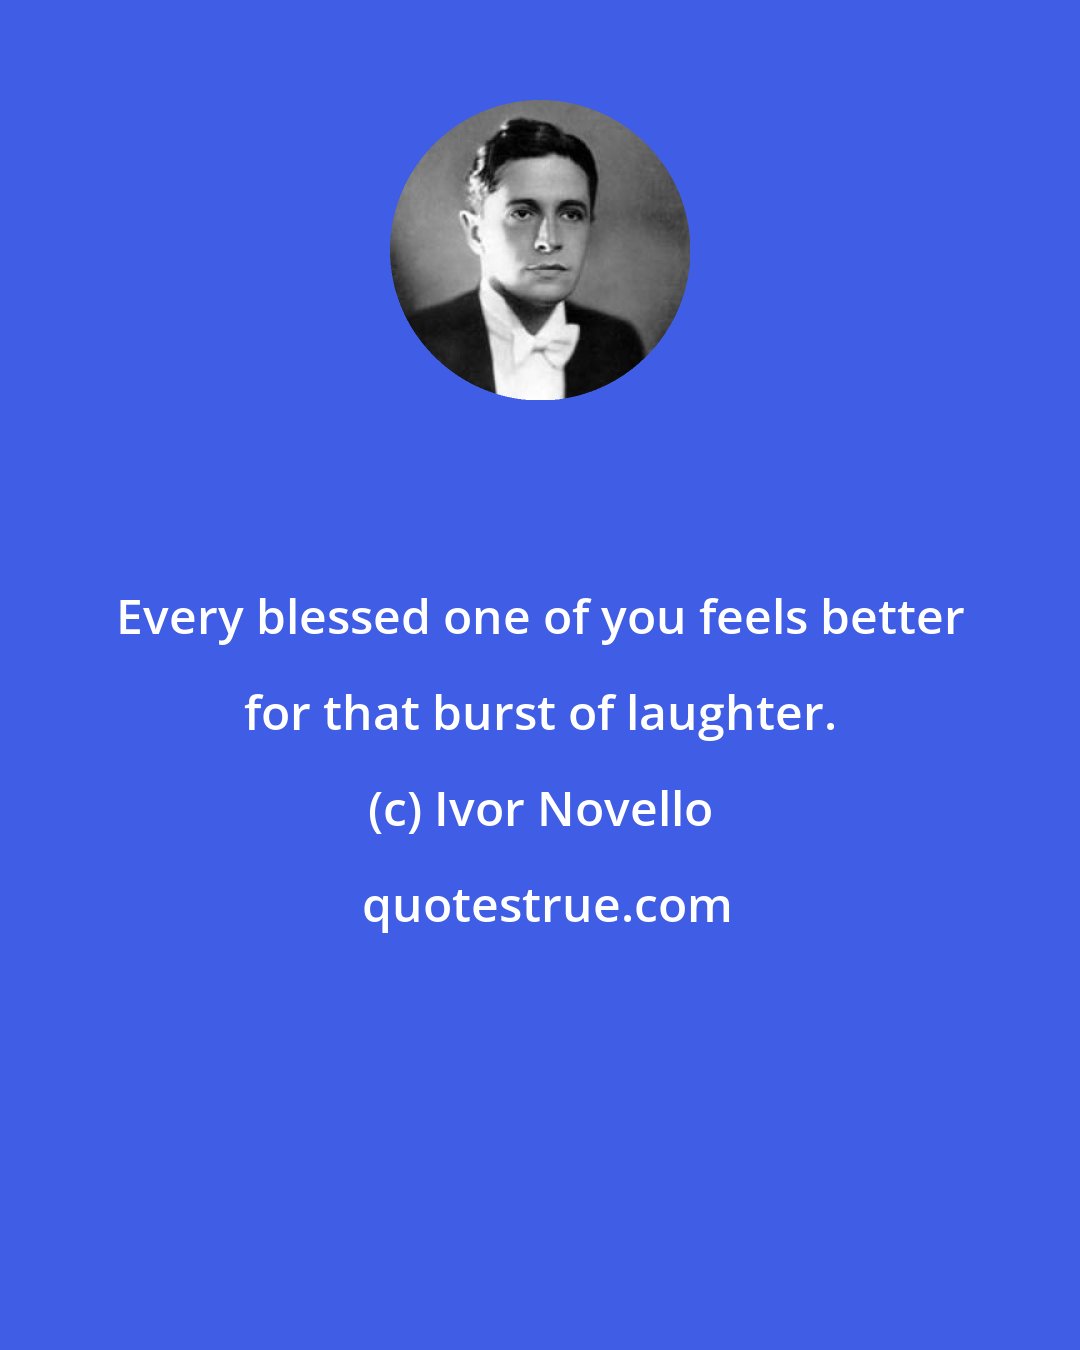 Ivor Novello: Every blessed one of you feels better for that burst of laughter.